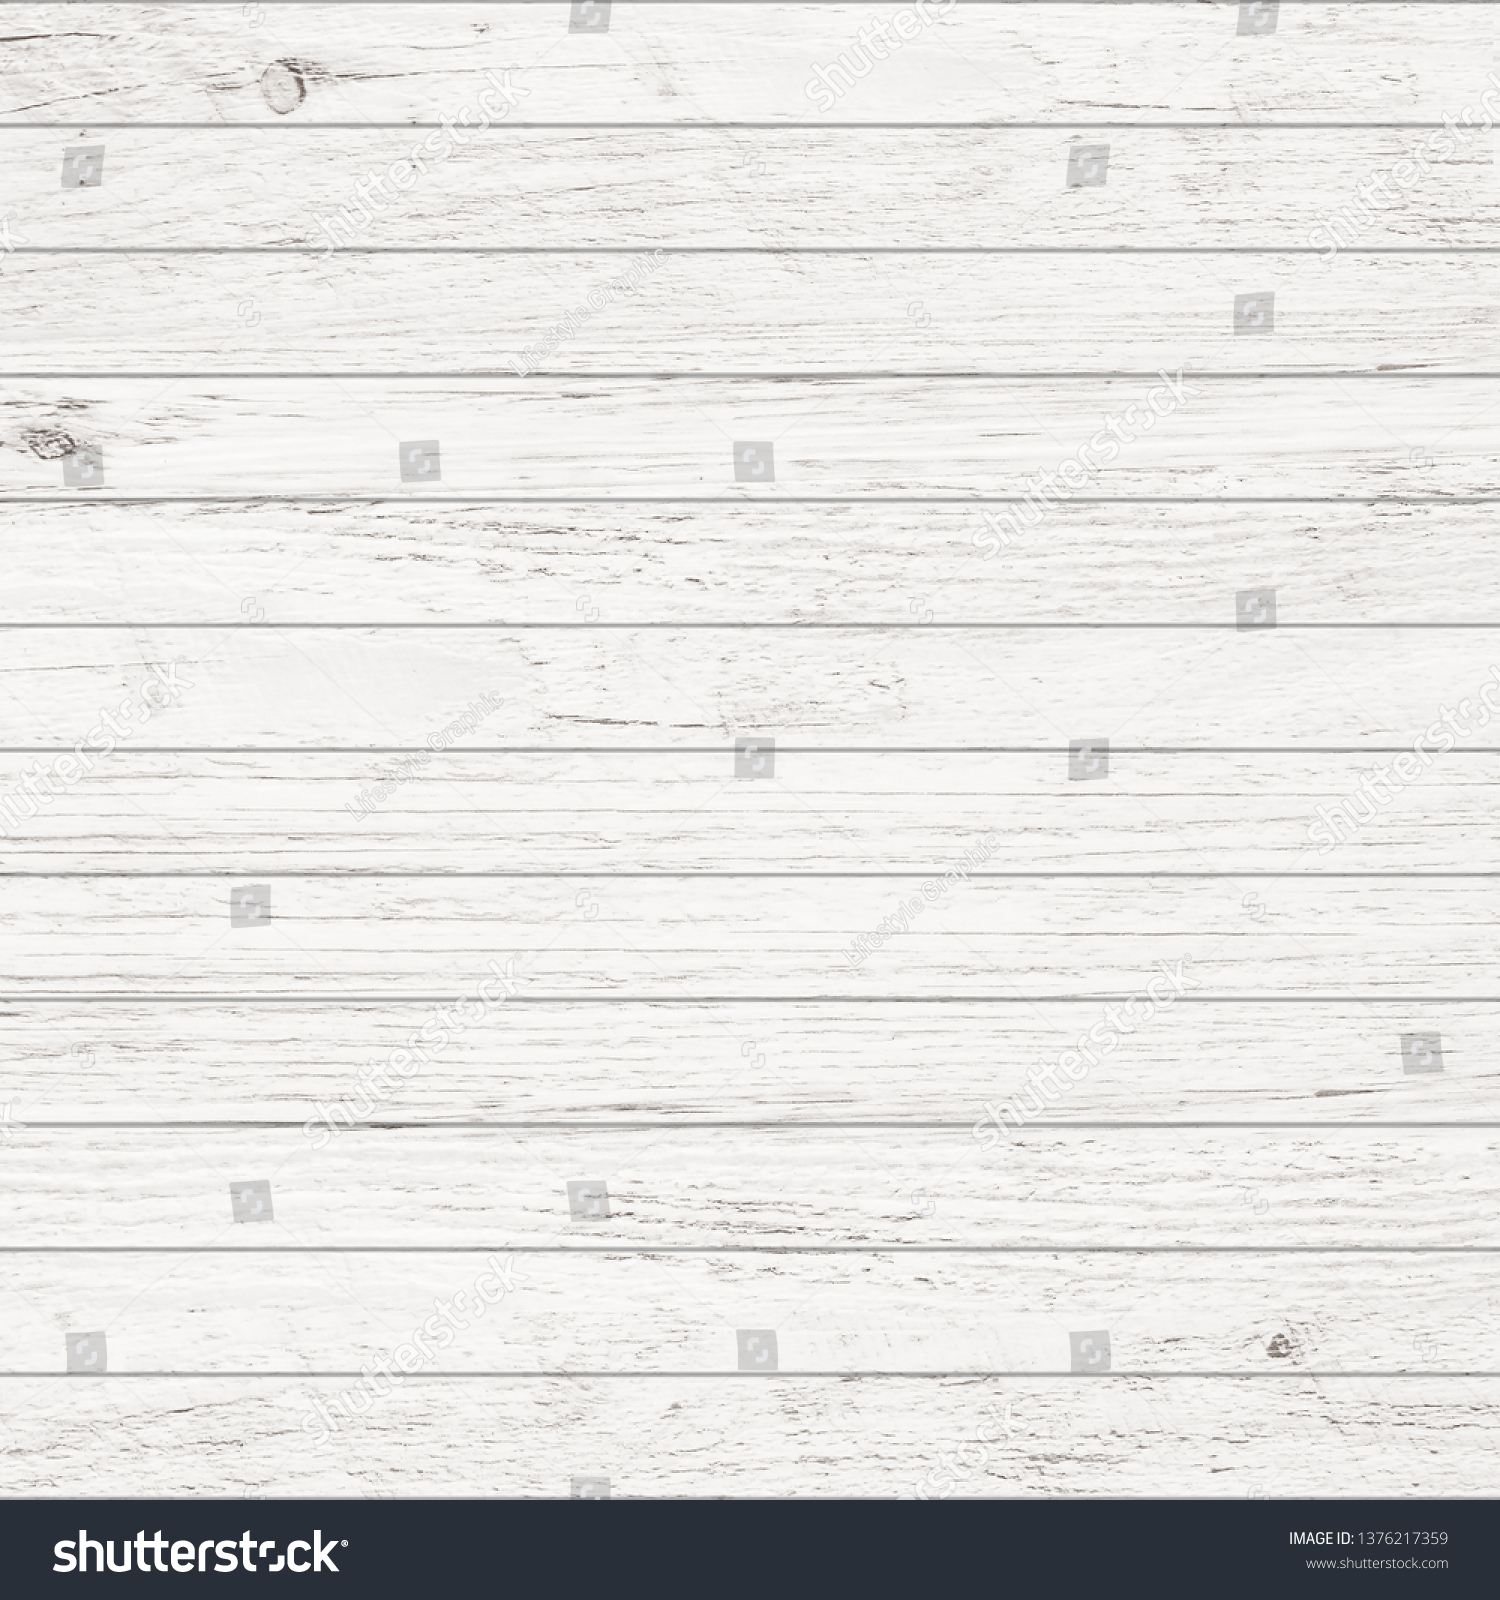 White wood pattern and texture for background. Close-up image. #1376217359